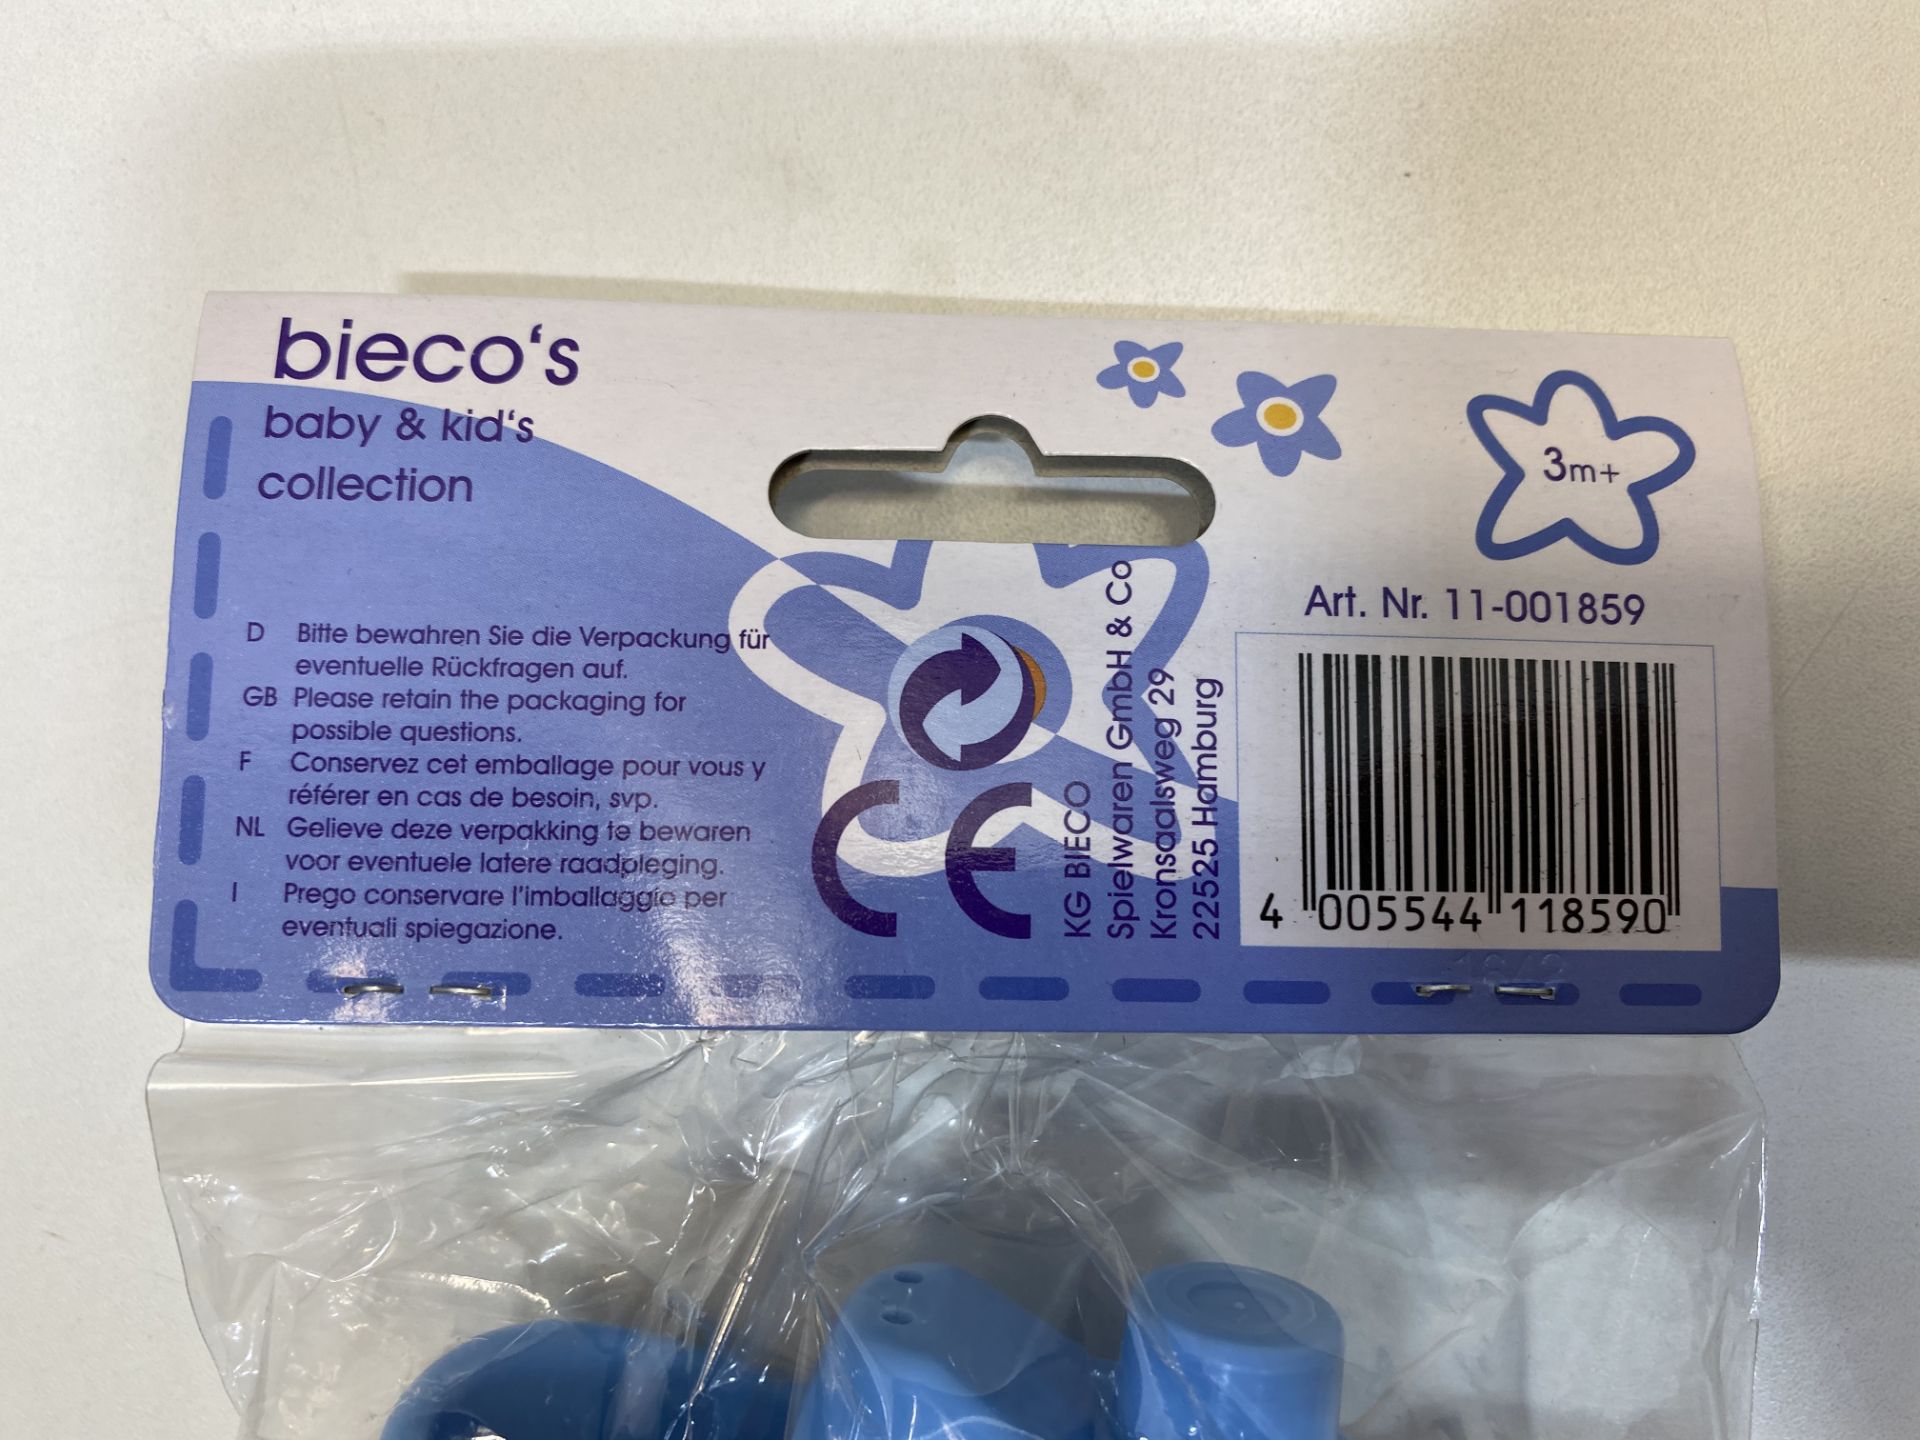 13 x Bieco 3 stacking boat bath toy sets |4005544118590 - Image 4 of 4